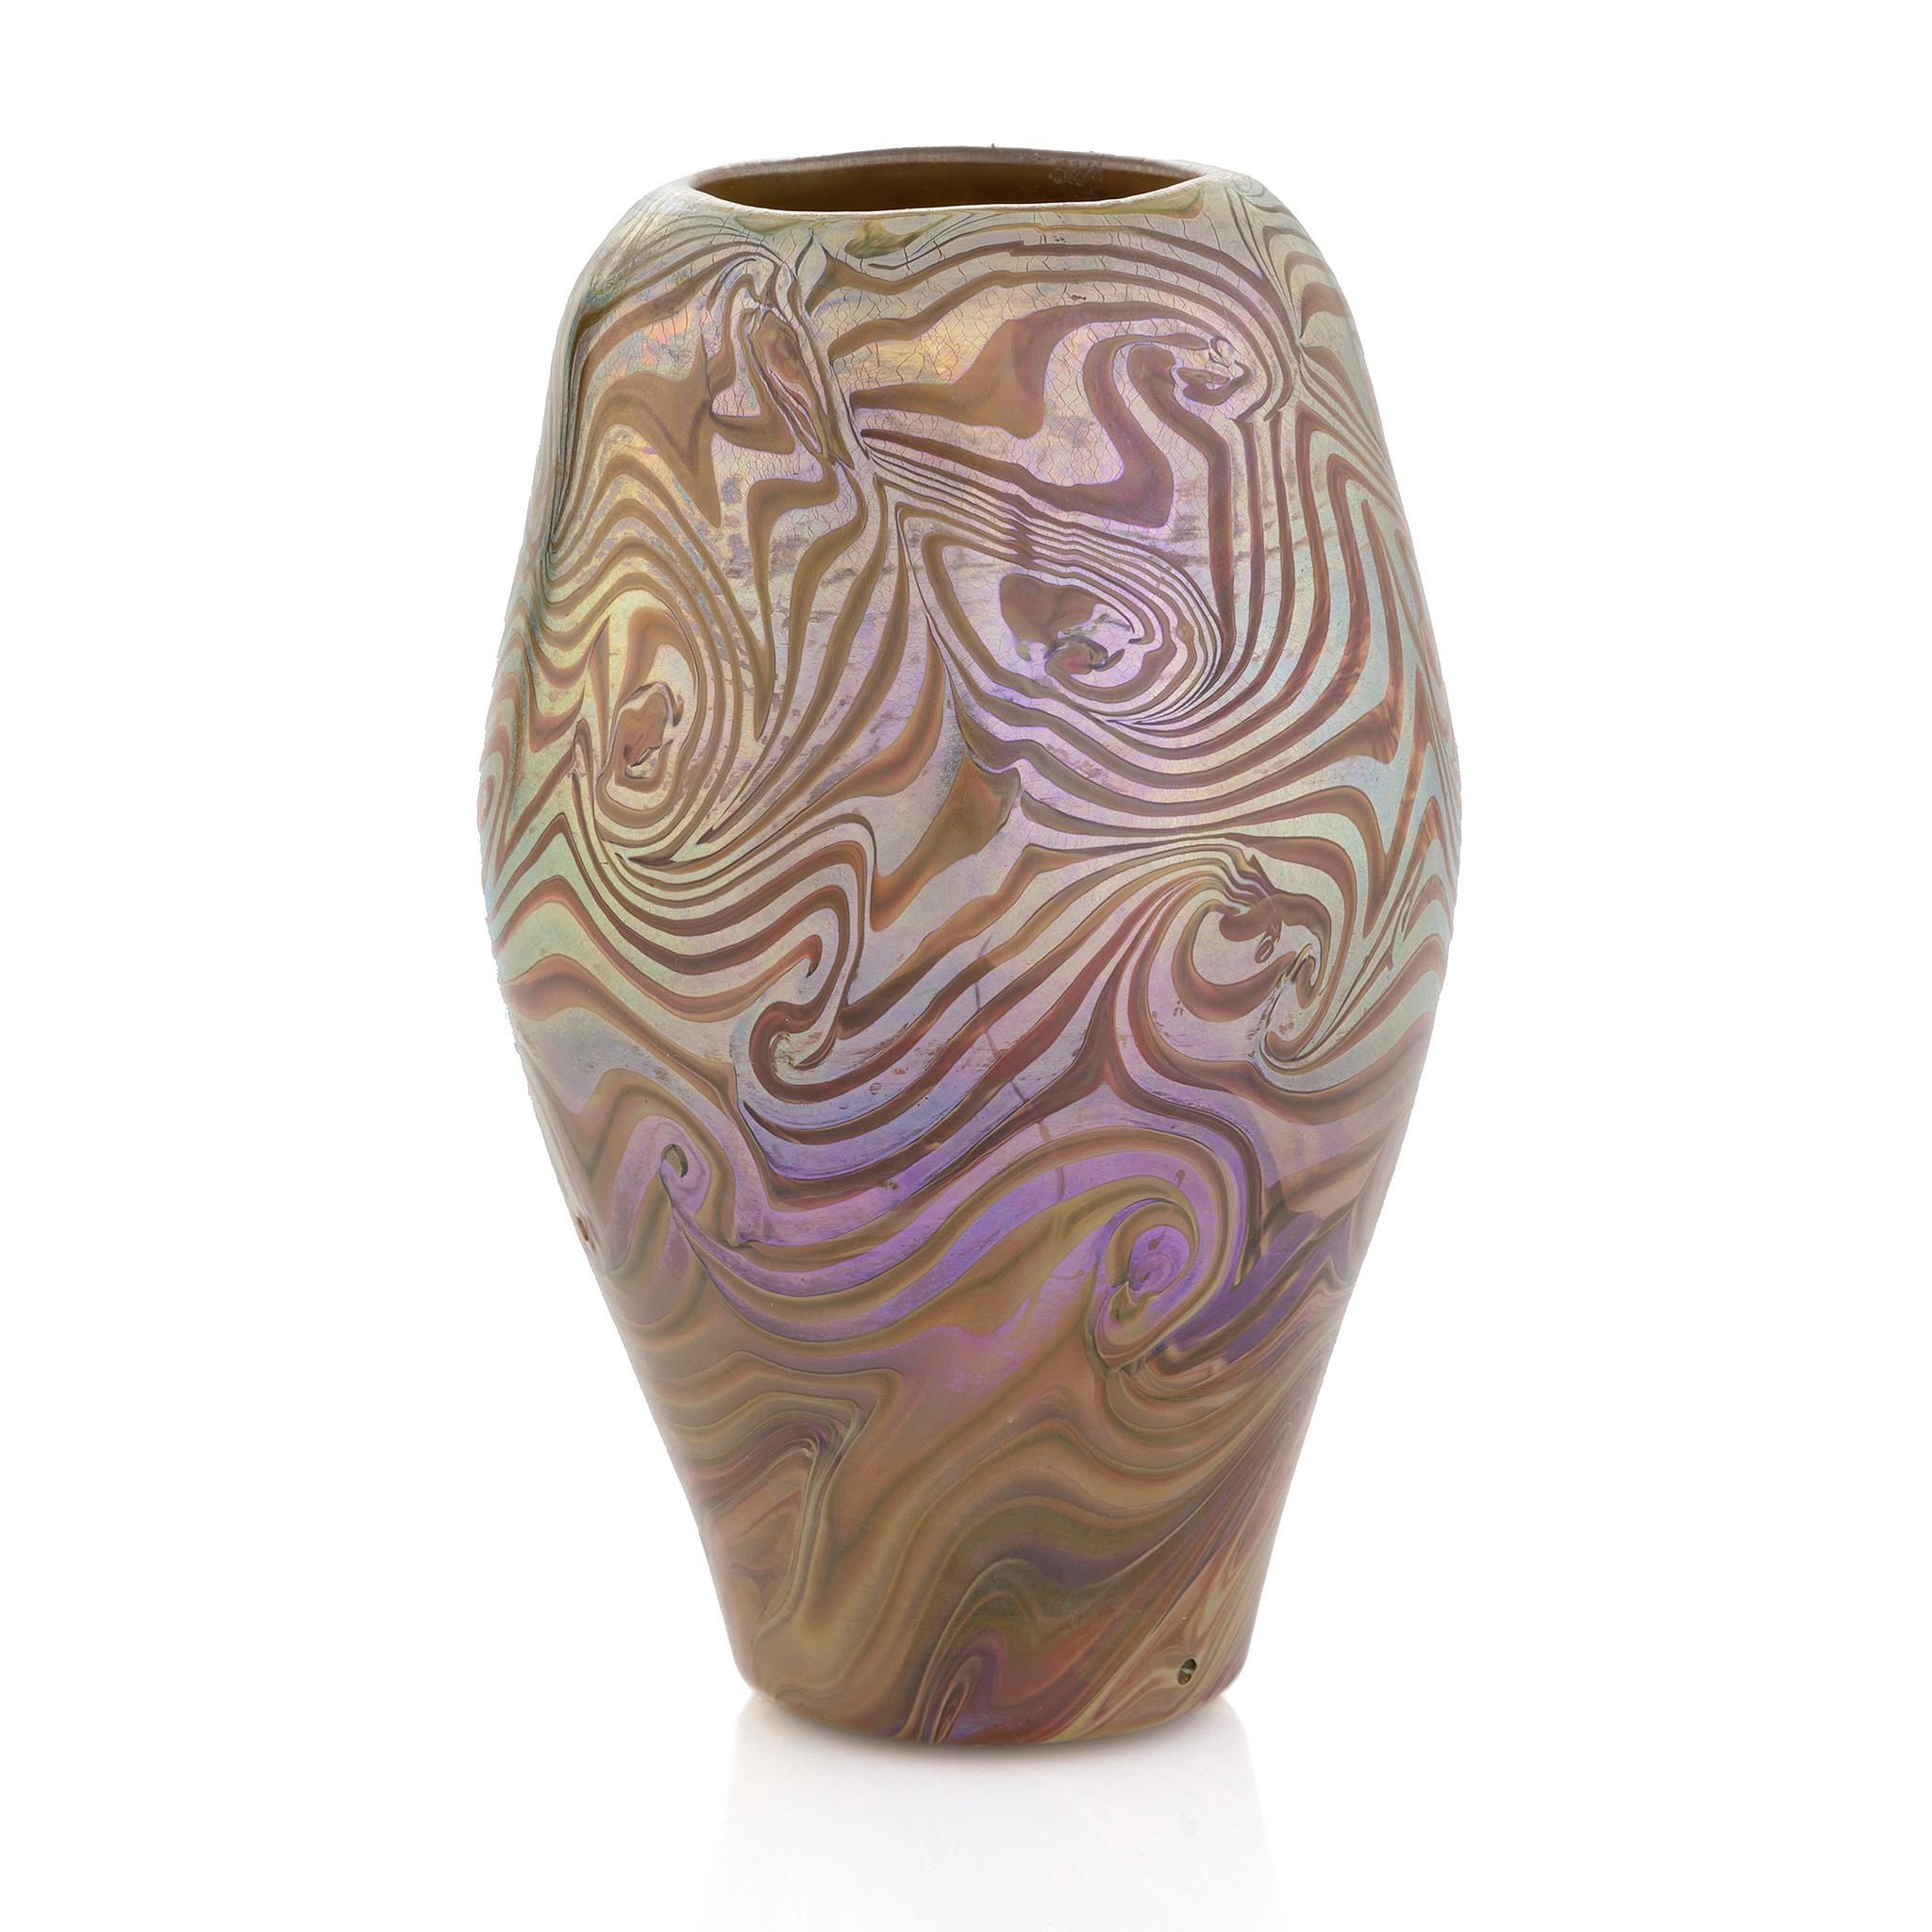 This arresting Damascene Favrile Glass Vase bears a swirling pattern of blue and purple iridescence and ochre glass. The vase's pattern is based upon Damascus steel, whereby near eastern blacksmiths welded iron and high carbon steel, folding the